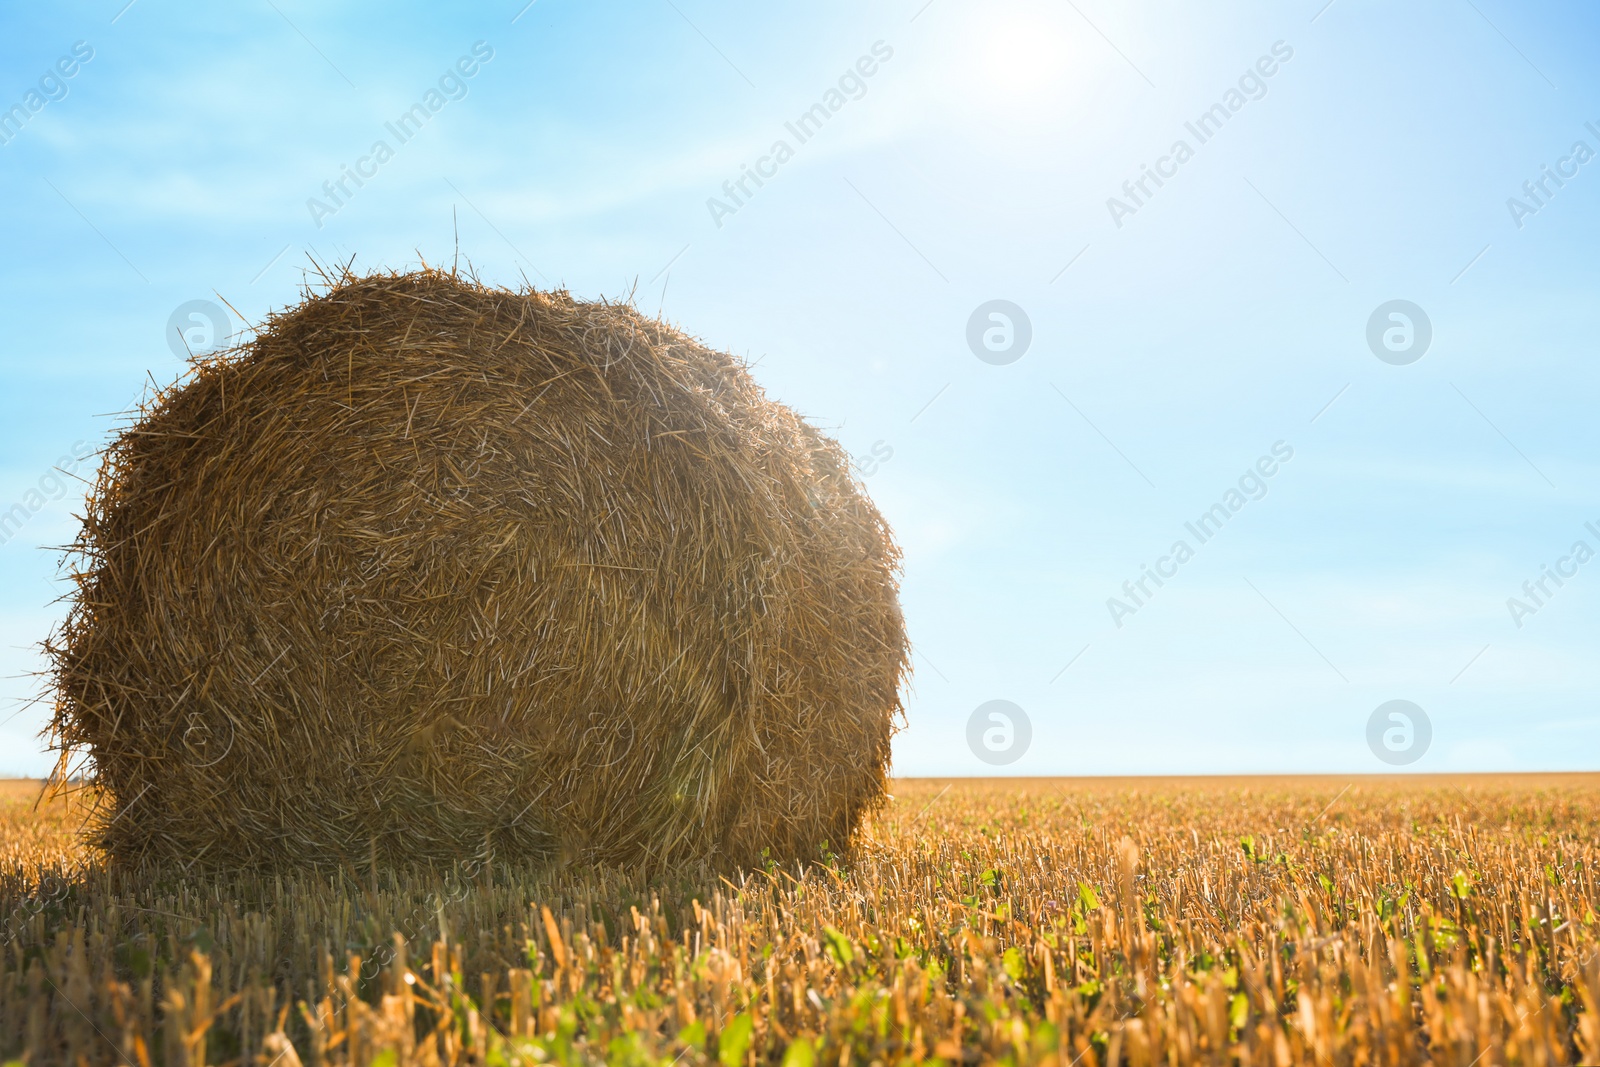 Photo of Round rolled hay bale in agricultural field on sunny day